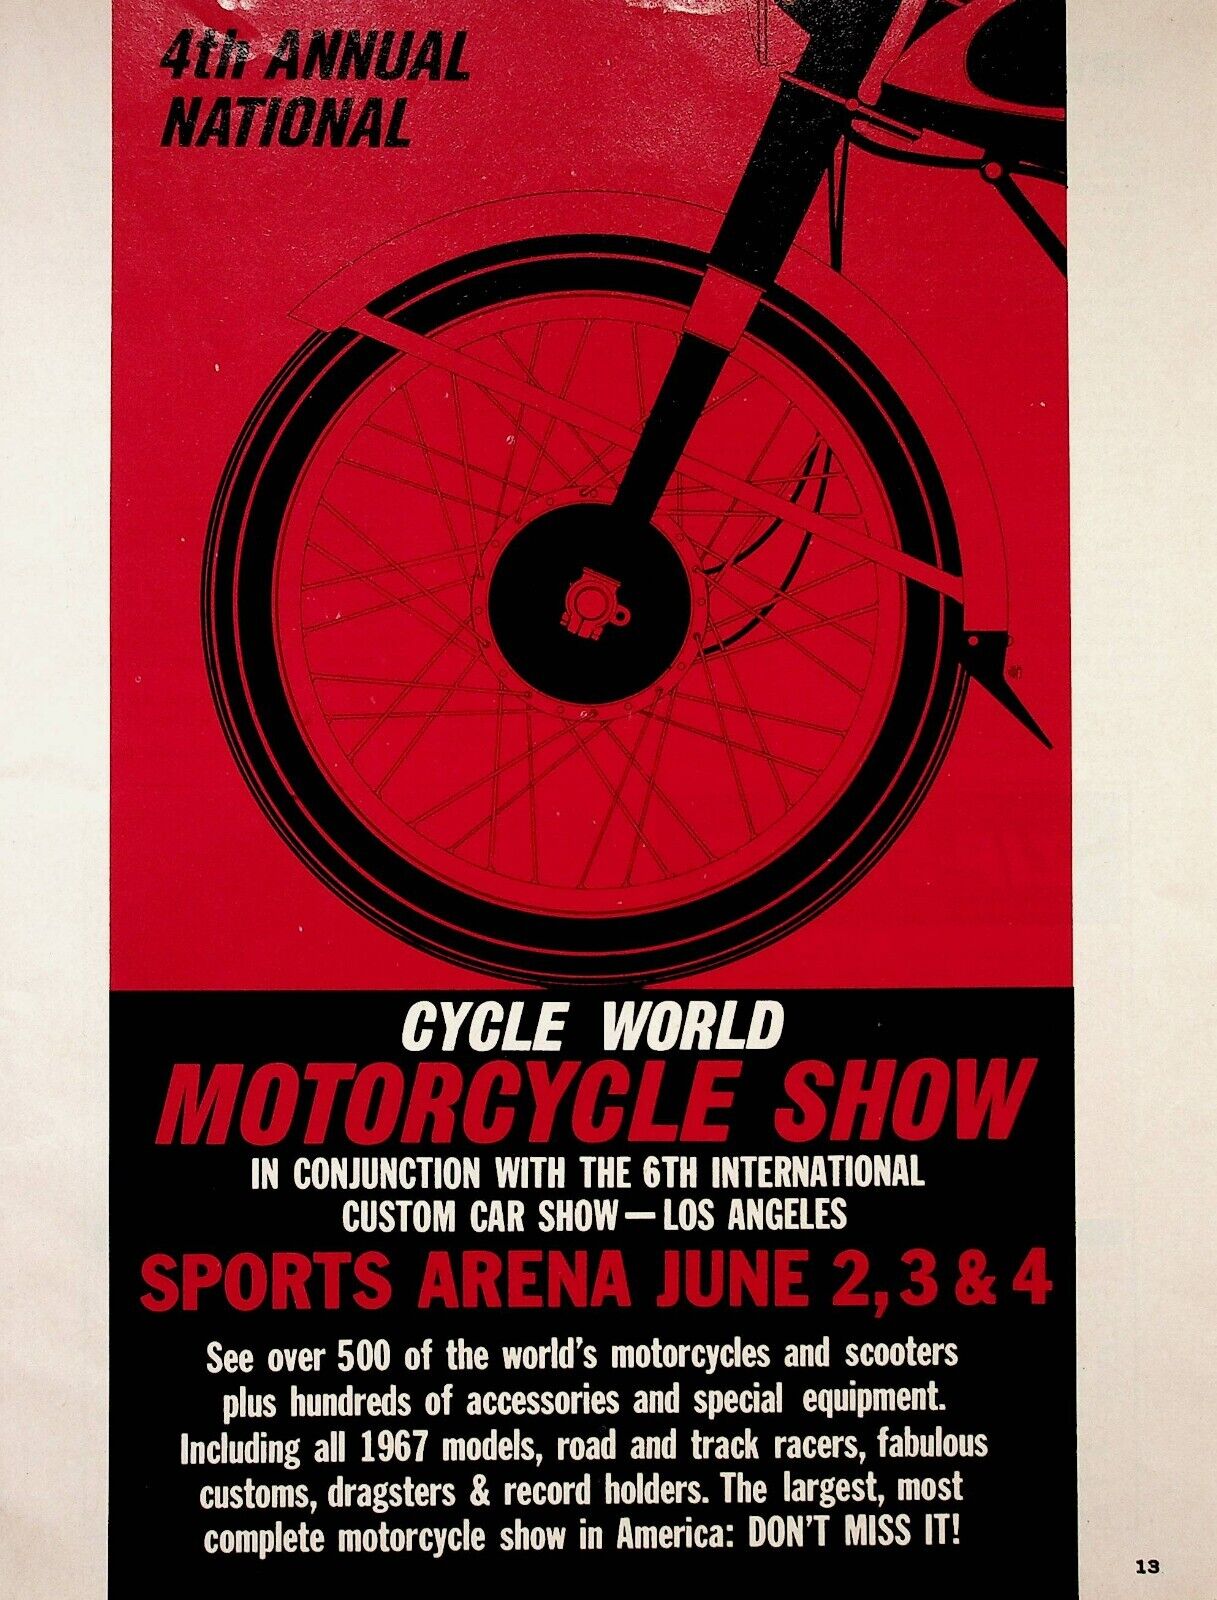 1967 Los Angeles Sports Arena Motorcycle Show - Vintage Ad